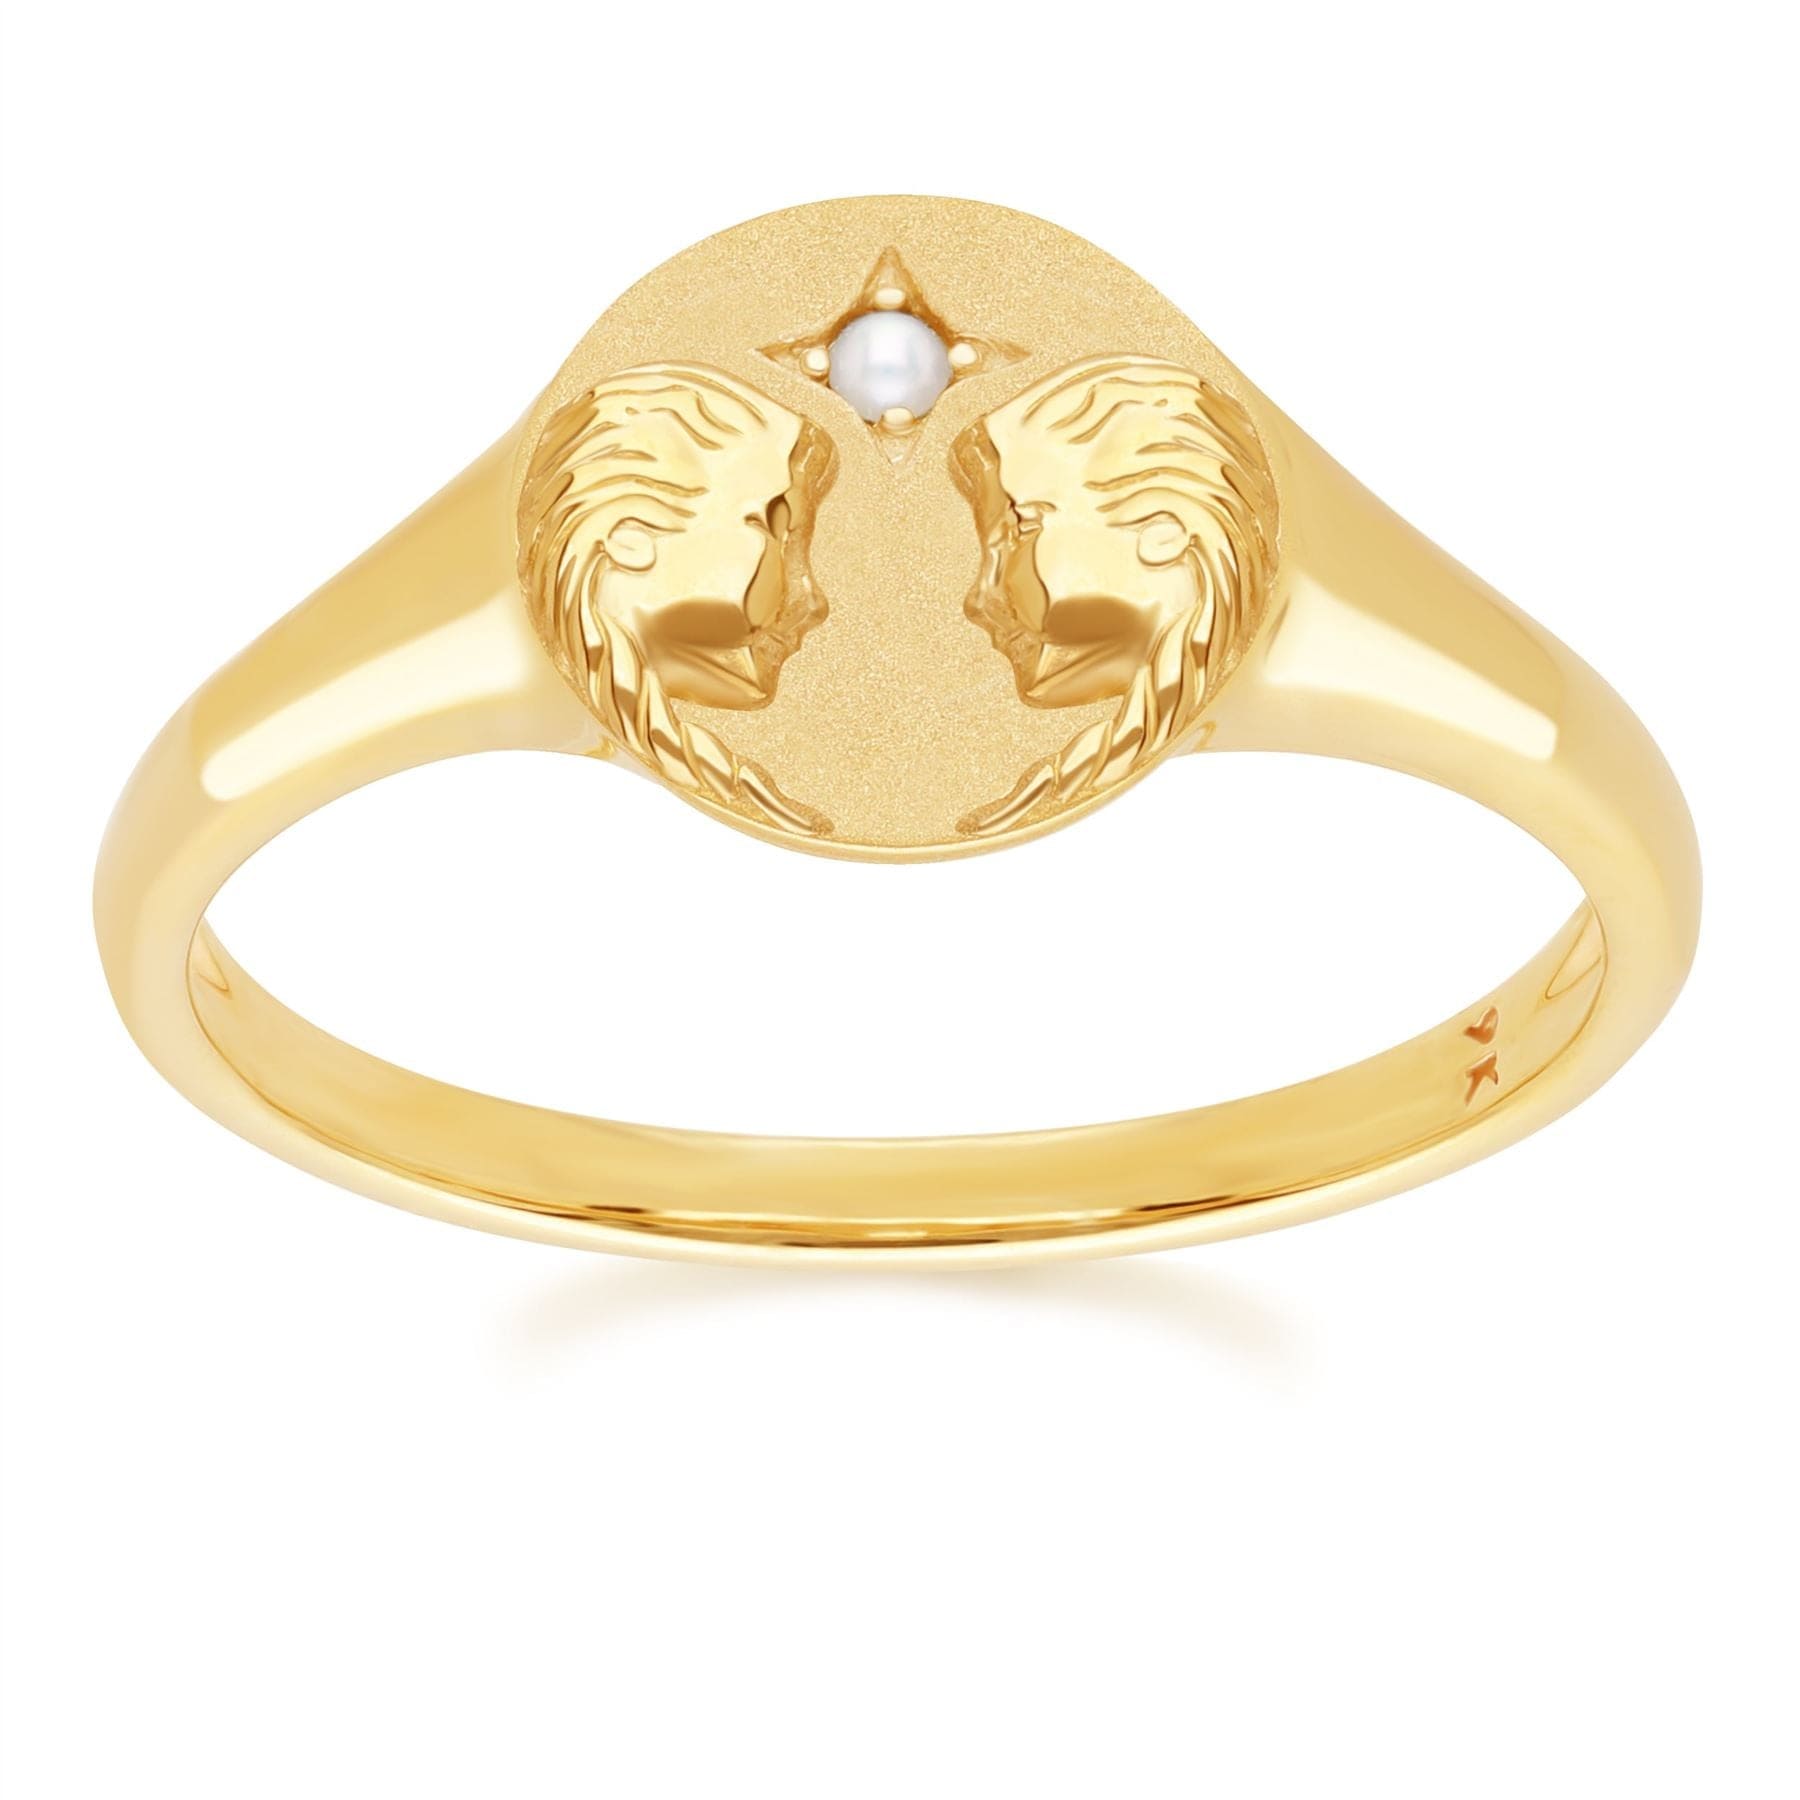 "Zodiac Freshwater Pearl Gemini Signet Ring In 9ct Yellow GoldFront  135R2084019